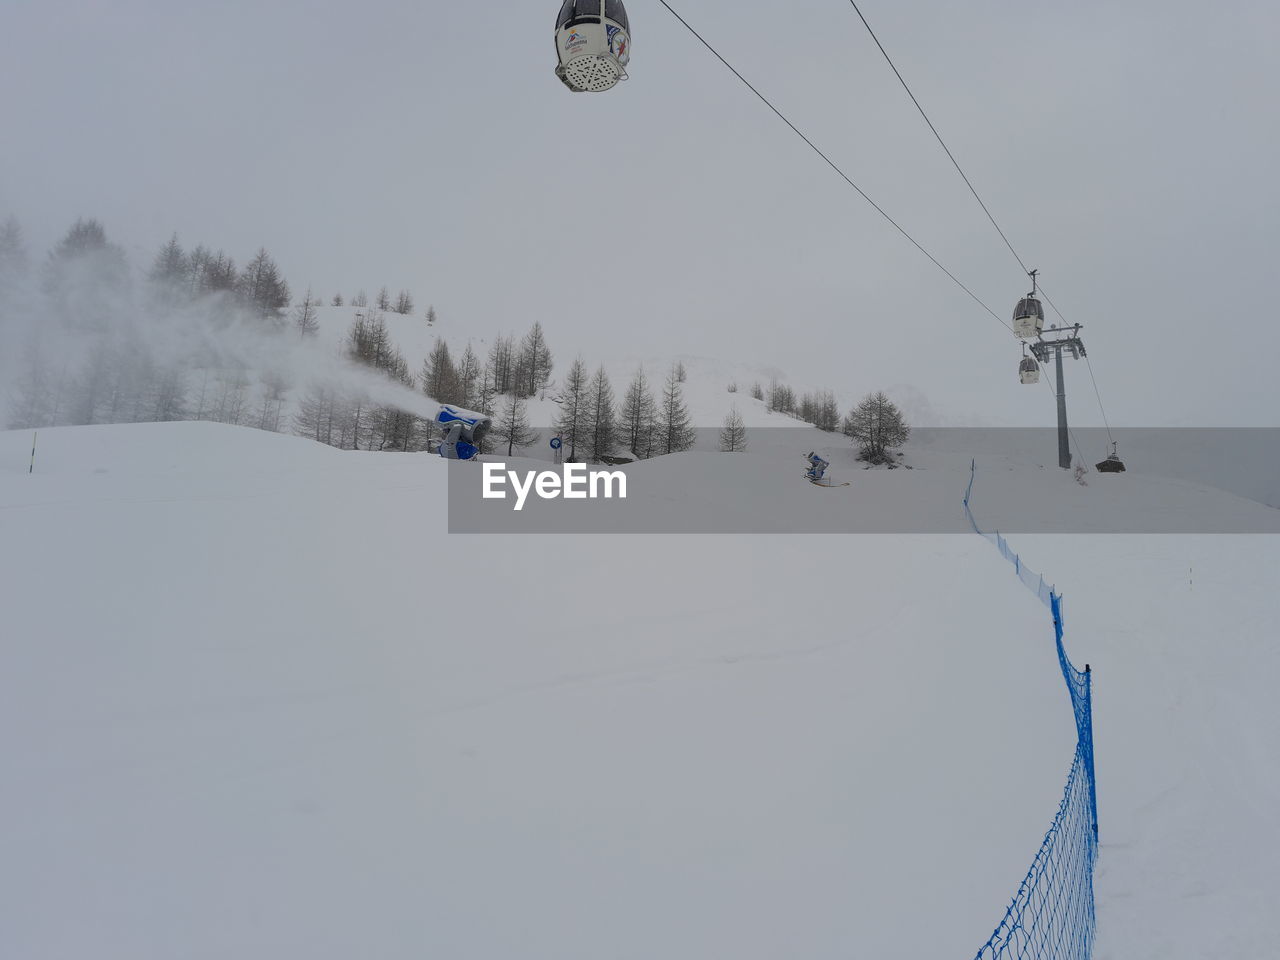 Close up of ski lift durino a snowfall with snow cannons belinda it ski on snow covered landscape